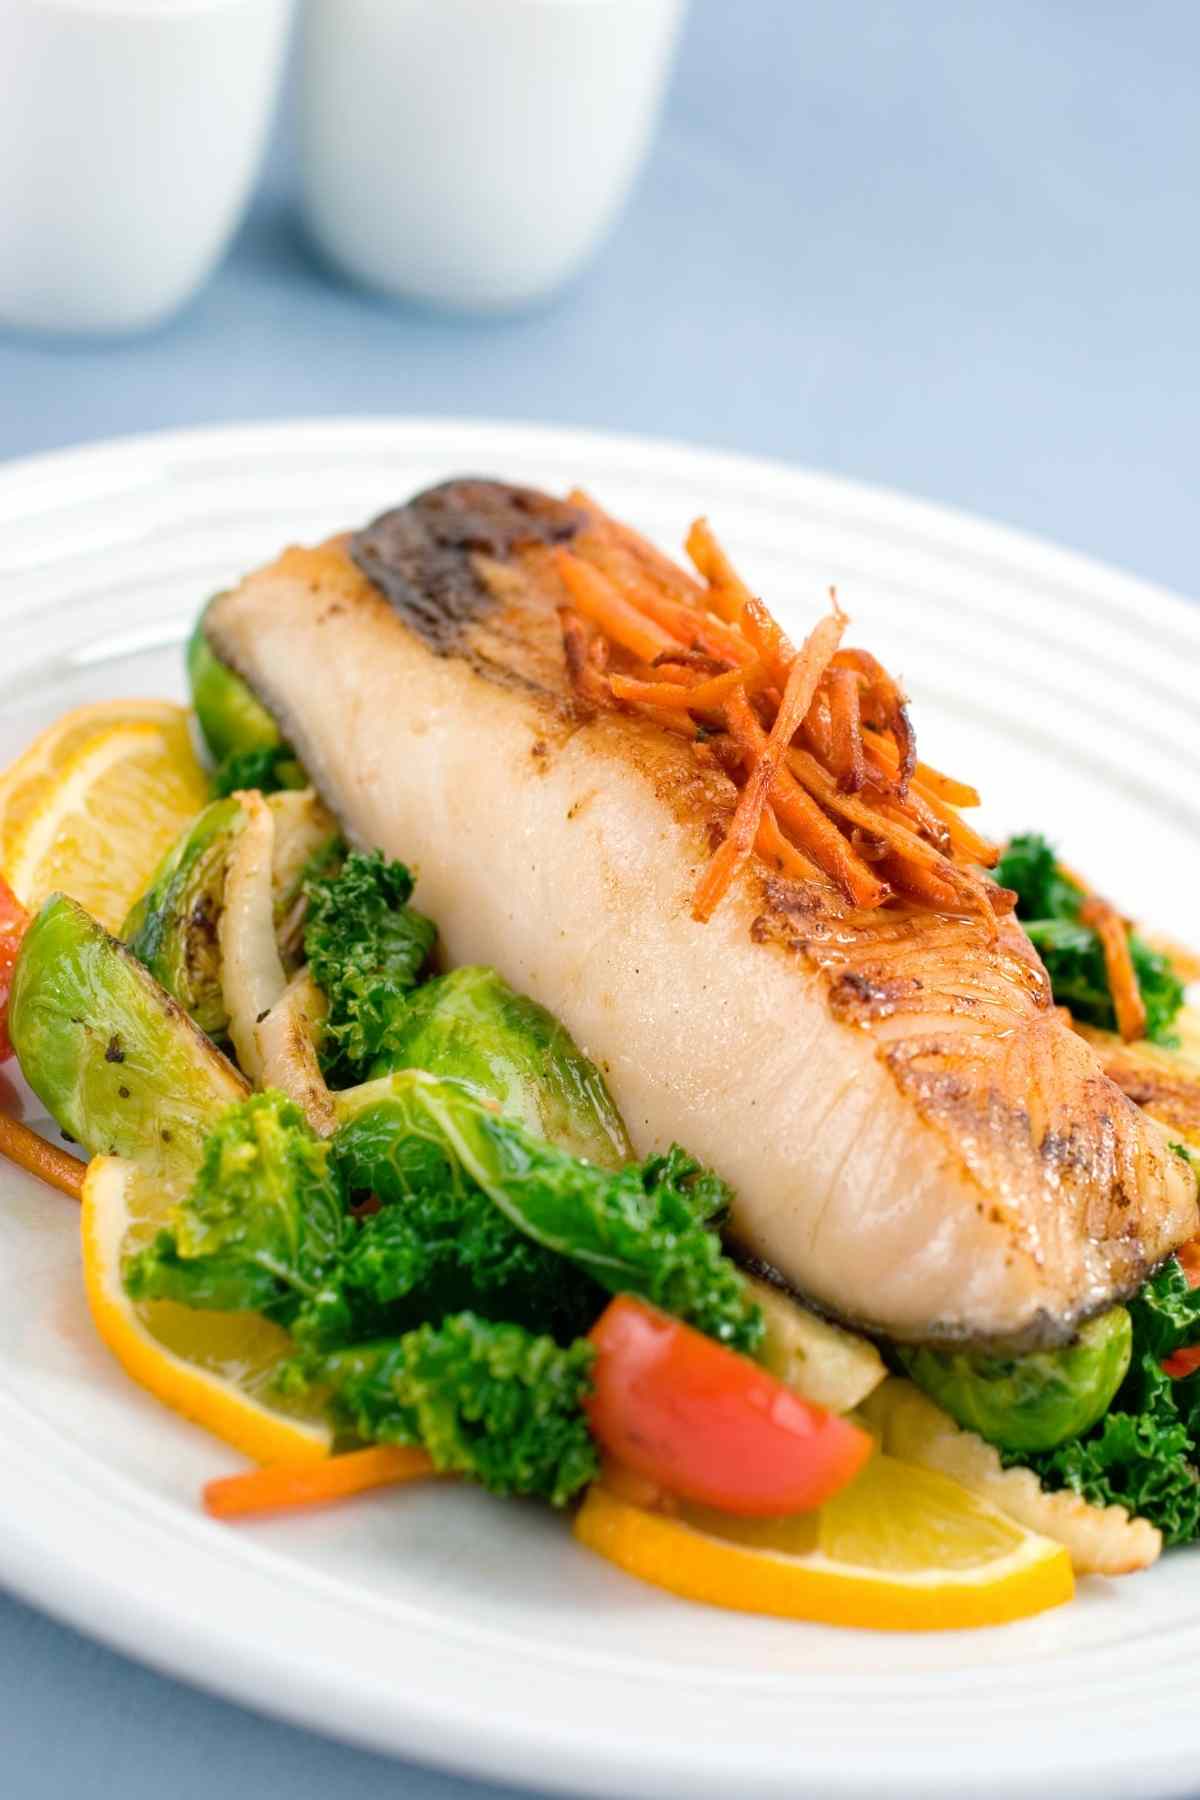 Also known as black cod, Sablefish is a mild-flavored white fish. It is prized for the silky texture of its flakes and its buttery-sweet flavor.